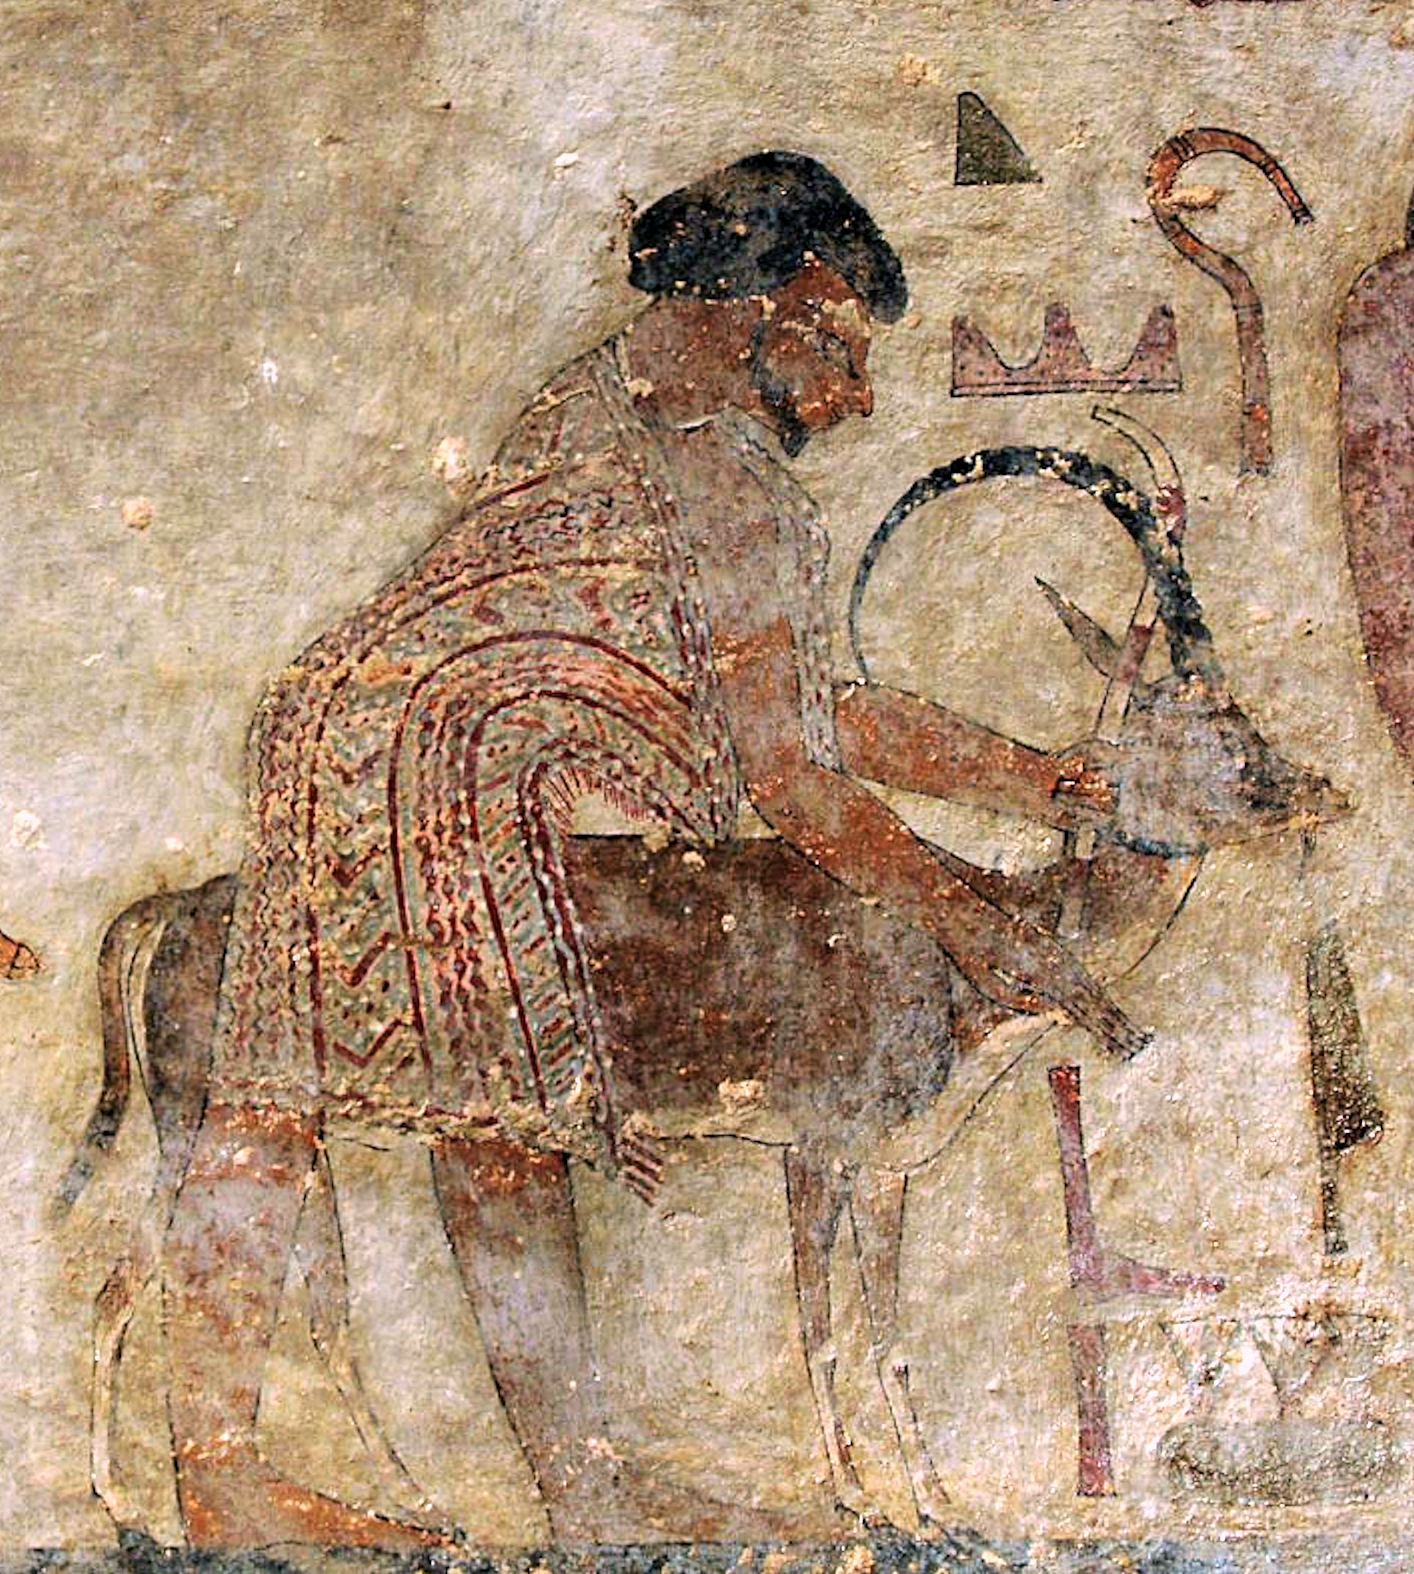 painting_of_foreign_delegation_in_the_tomb_of_khnumhotep_ii_circa_1900_bce_28detail_mentioning_22abisha_the_hyksos22_in_hieroglyphs29